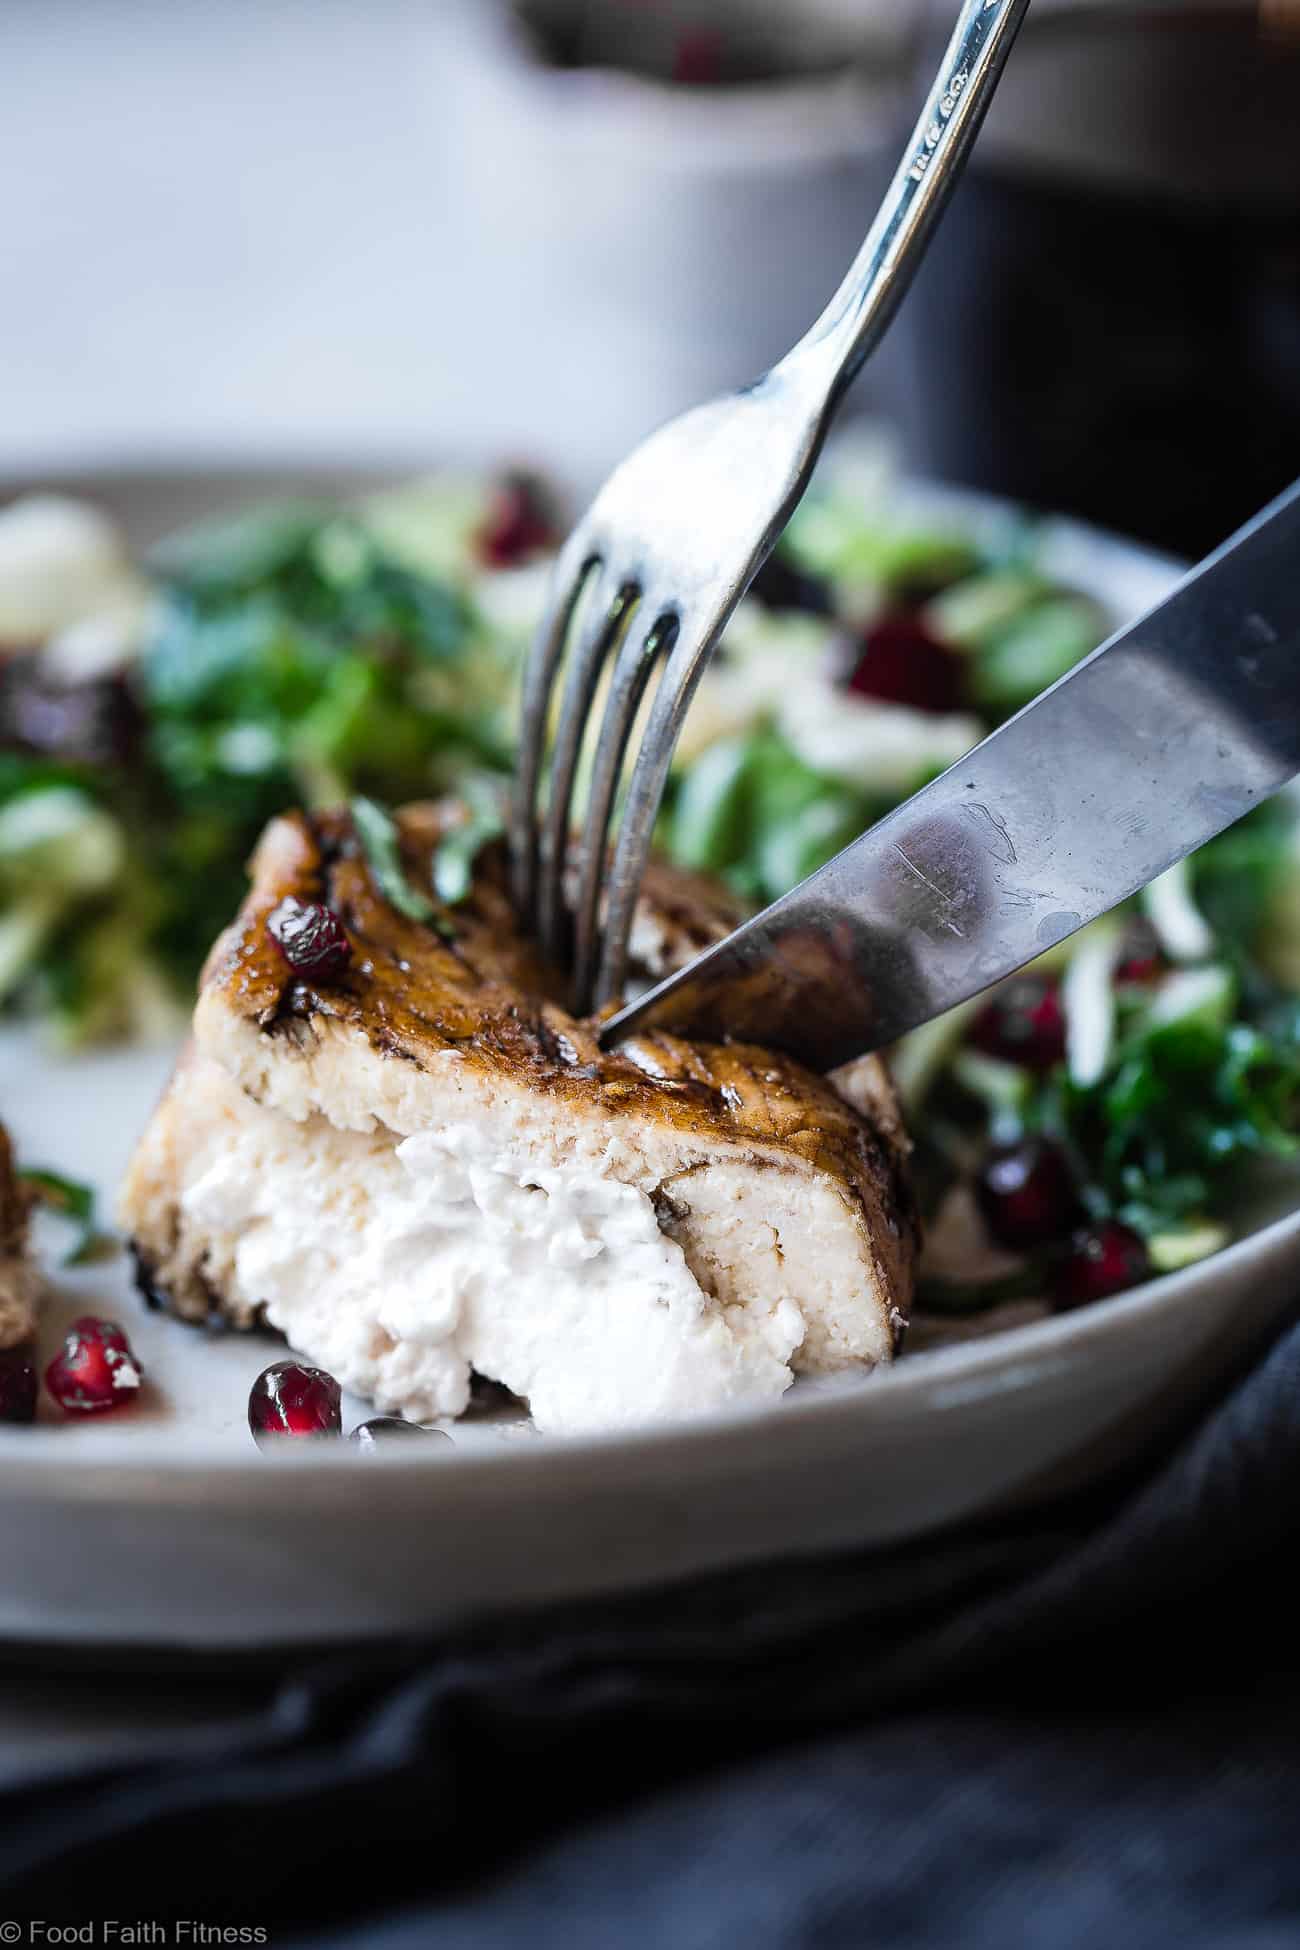 Balsamic Pomegranate Goat Cheese Stuffed Chicken - AÂ  healthy and gluten free dinner, loaded with superfoods! Both picky husbands and kids love this dinner and it feels like a fancy restaurant but is quick and easy enough for weeknights! | Foodfaithfitness.com | @FoodFaithFit